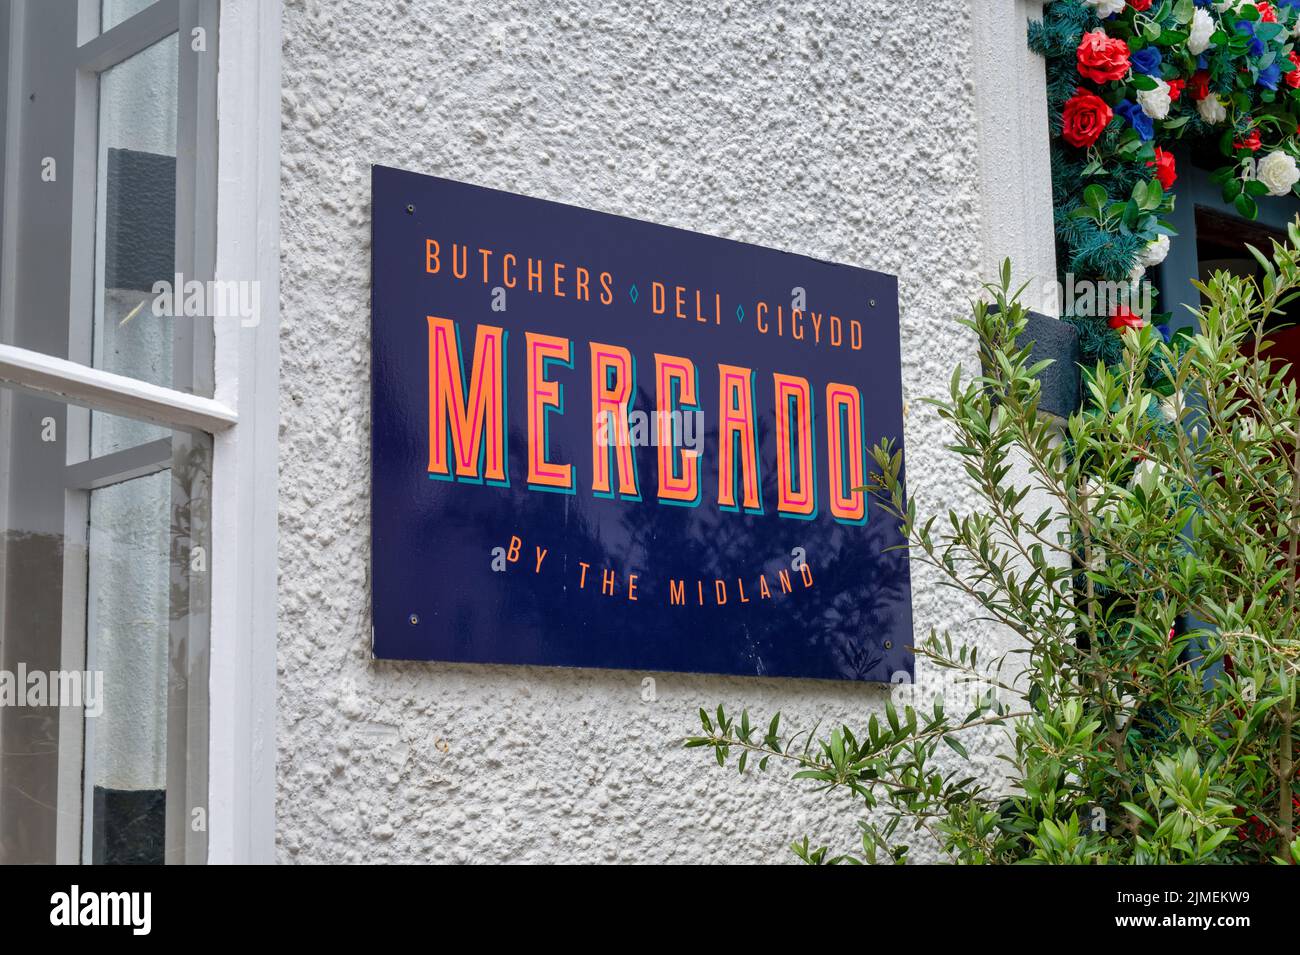 Beaumaris, UK- July 8, 2022: The sign for Mercado butchers and deli in Beaumaris on the isalnd of Anglesey Wales Stock Photo